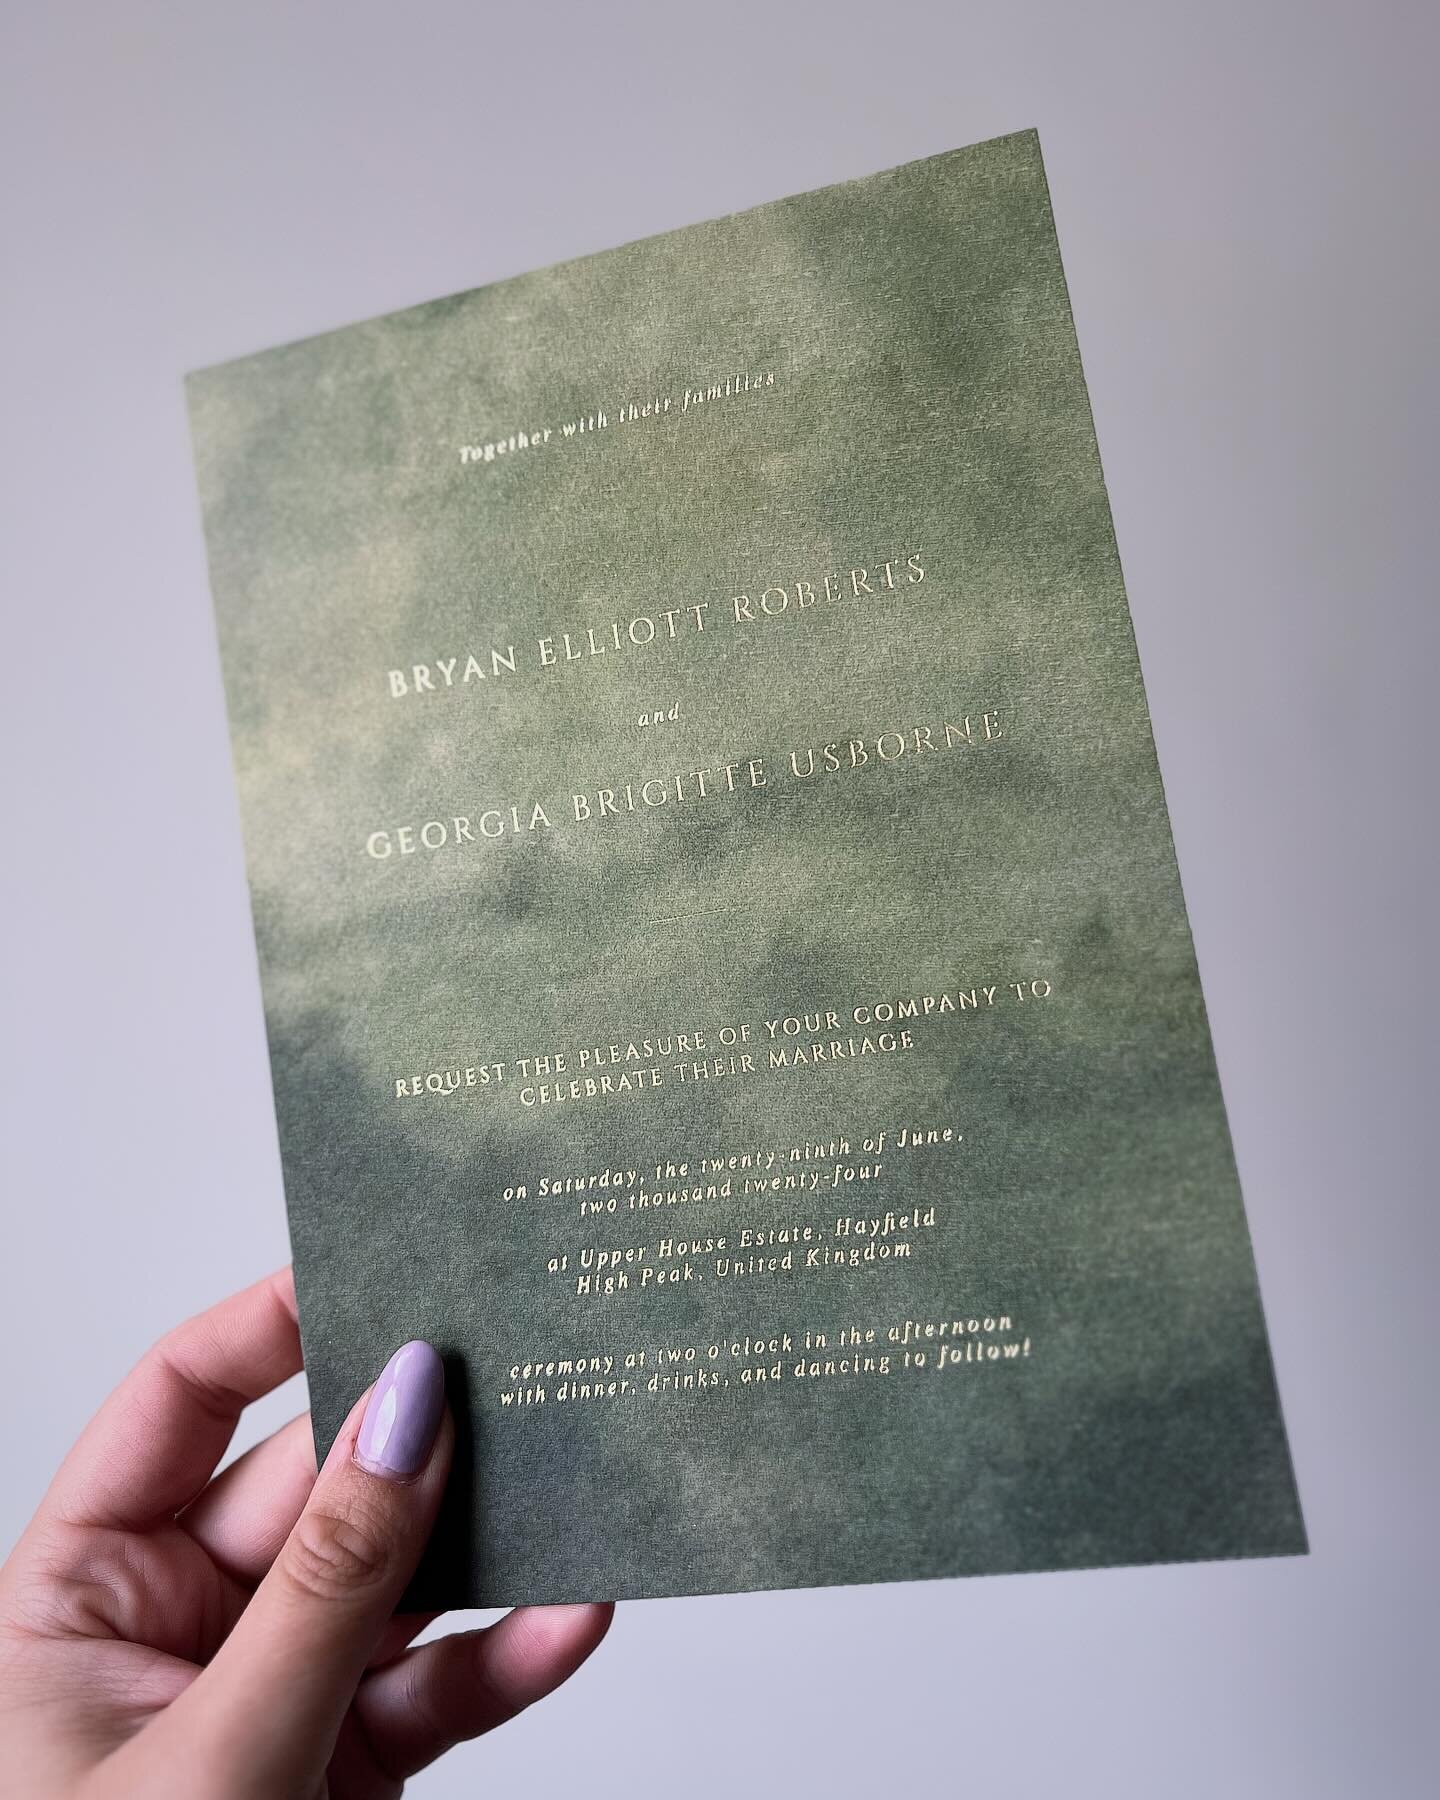 Green watercolour invitations with gold foil. I love how the gold glistens in the light ✨
.
.
.
#watercolour #watercolourstationery #greeninvitations #greenweddinginvitations #goldfoil #goldfoilweddinginvitations #ukweddingstationery